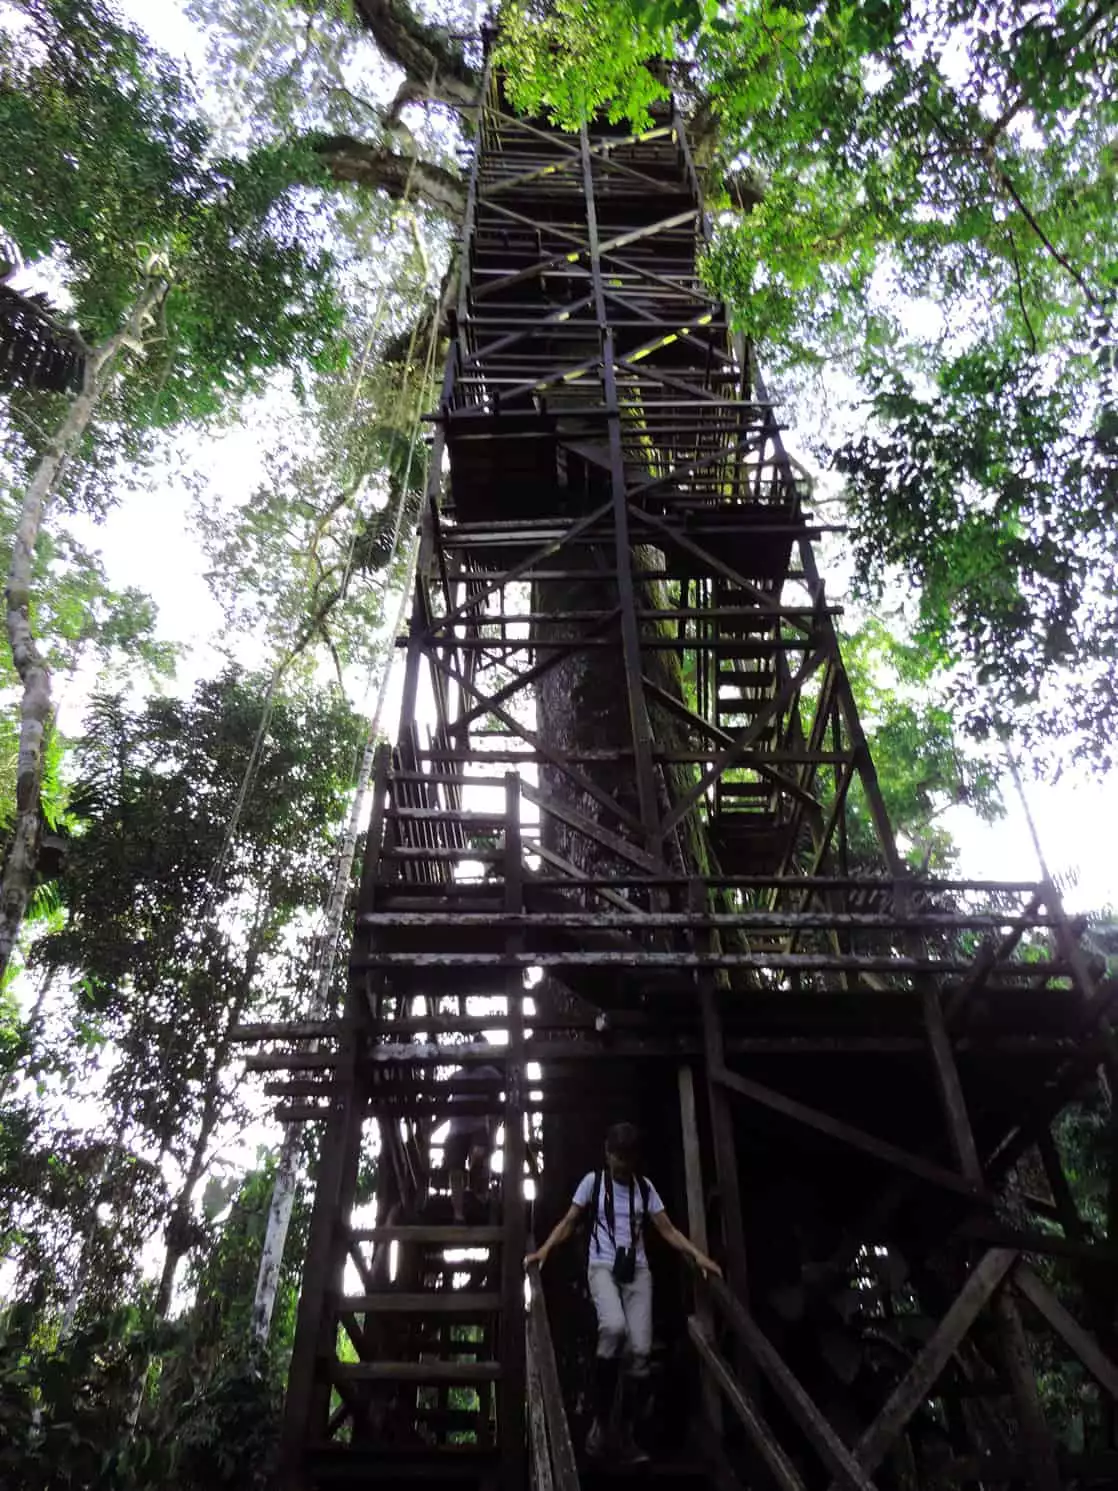 Wooden staircase to the suspended bridge with a Amazon traveler walking down in the jungle.